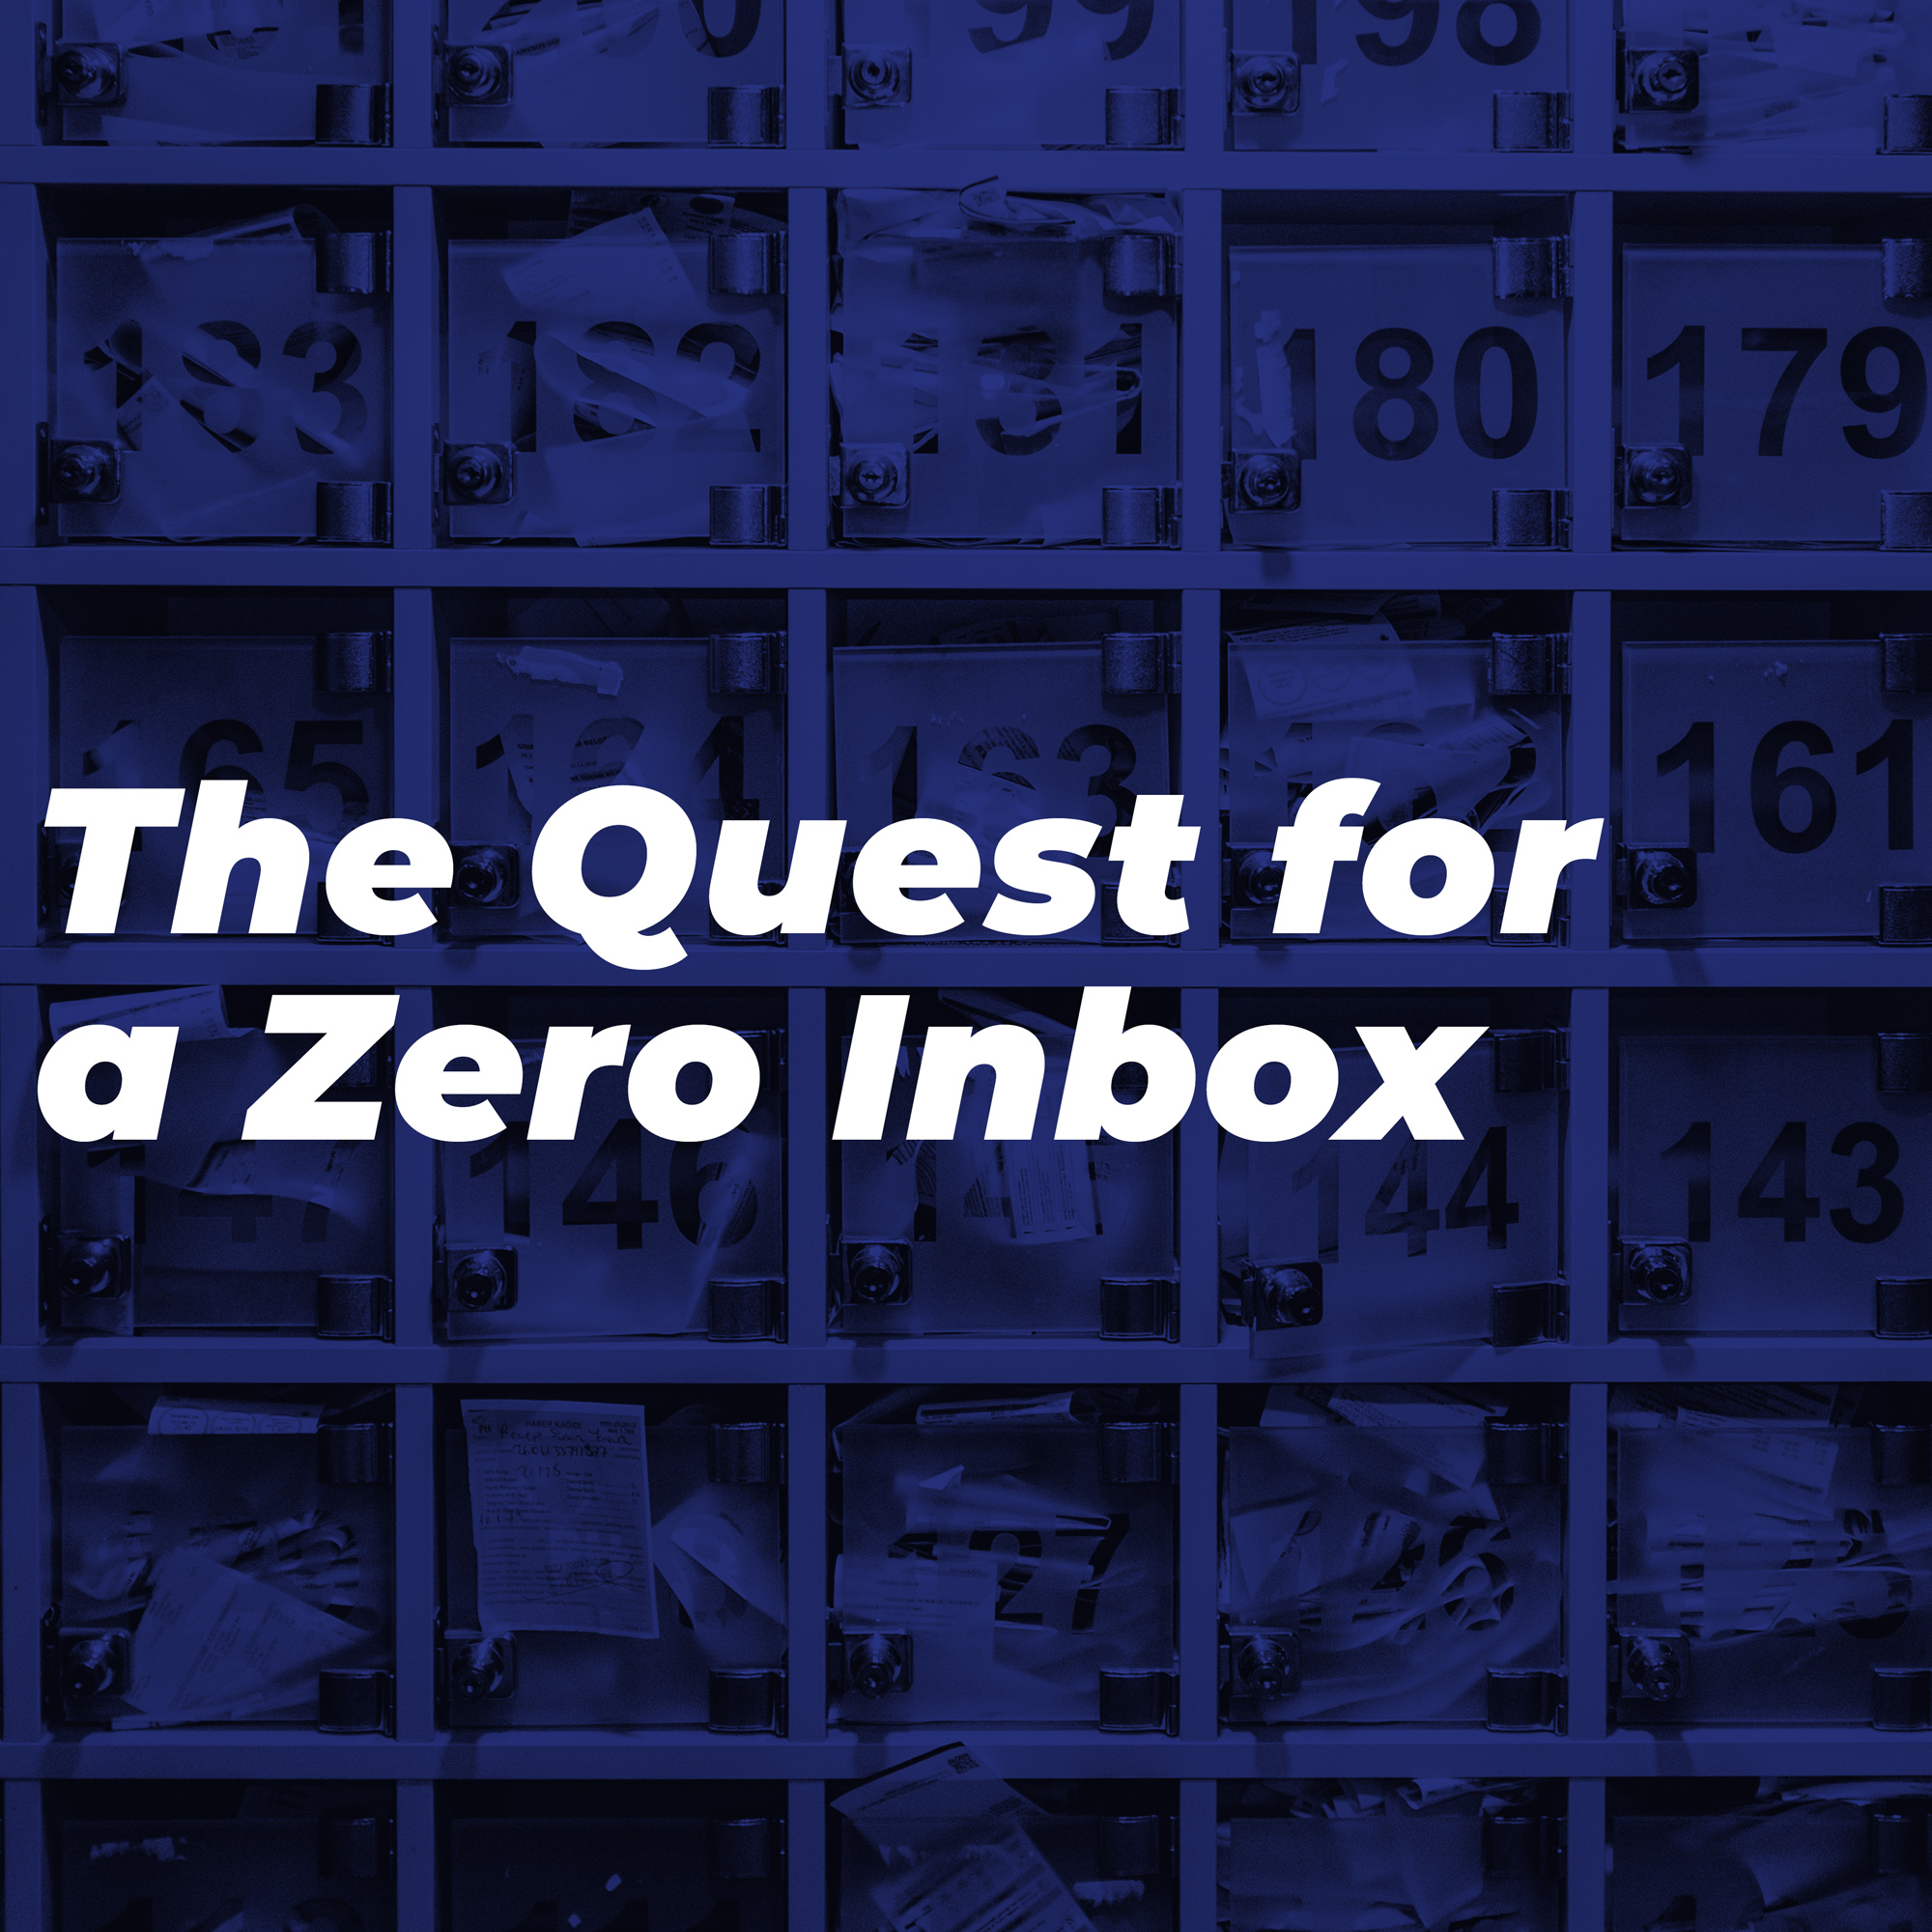 The Quest for a Zero Inbox